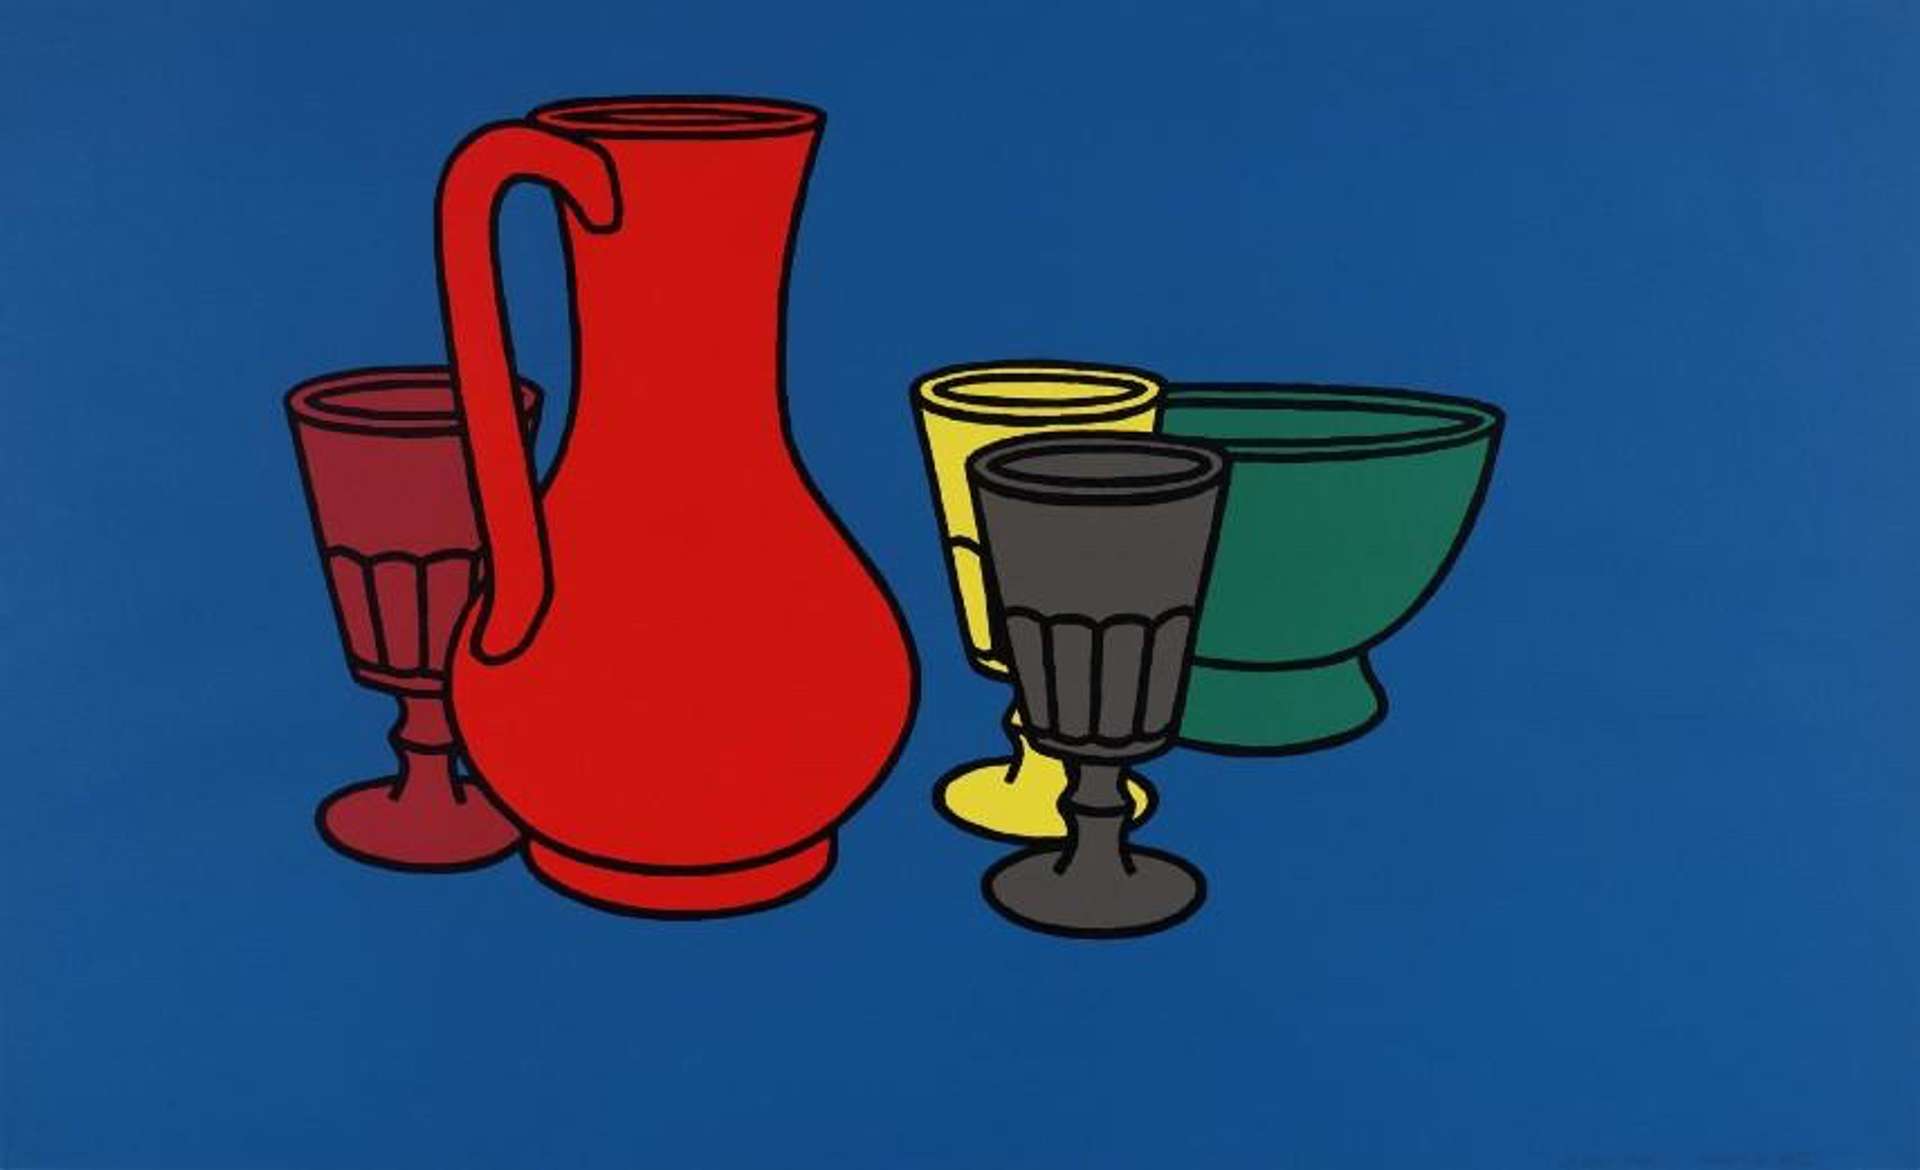  An image of the artwork Coloured Still Life (1967) by artist Patrick Caulfield. Three glasses, a jug and a bowl, drawn in graphic style and in solid colours, sit against a royal blue background.